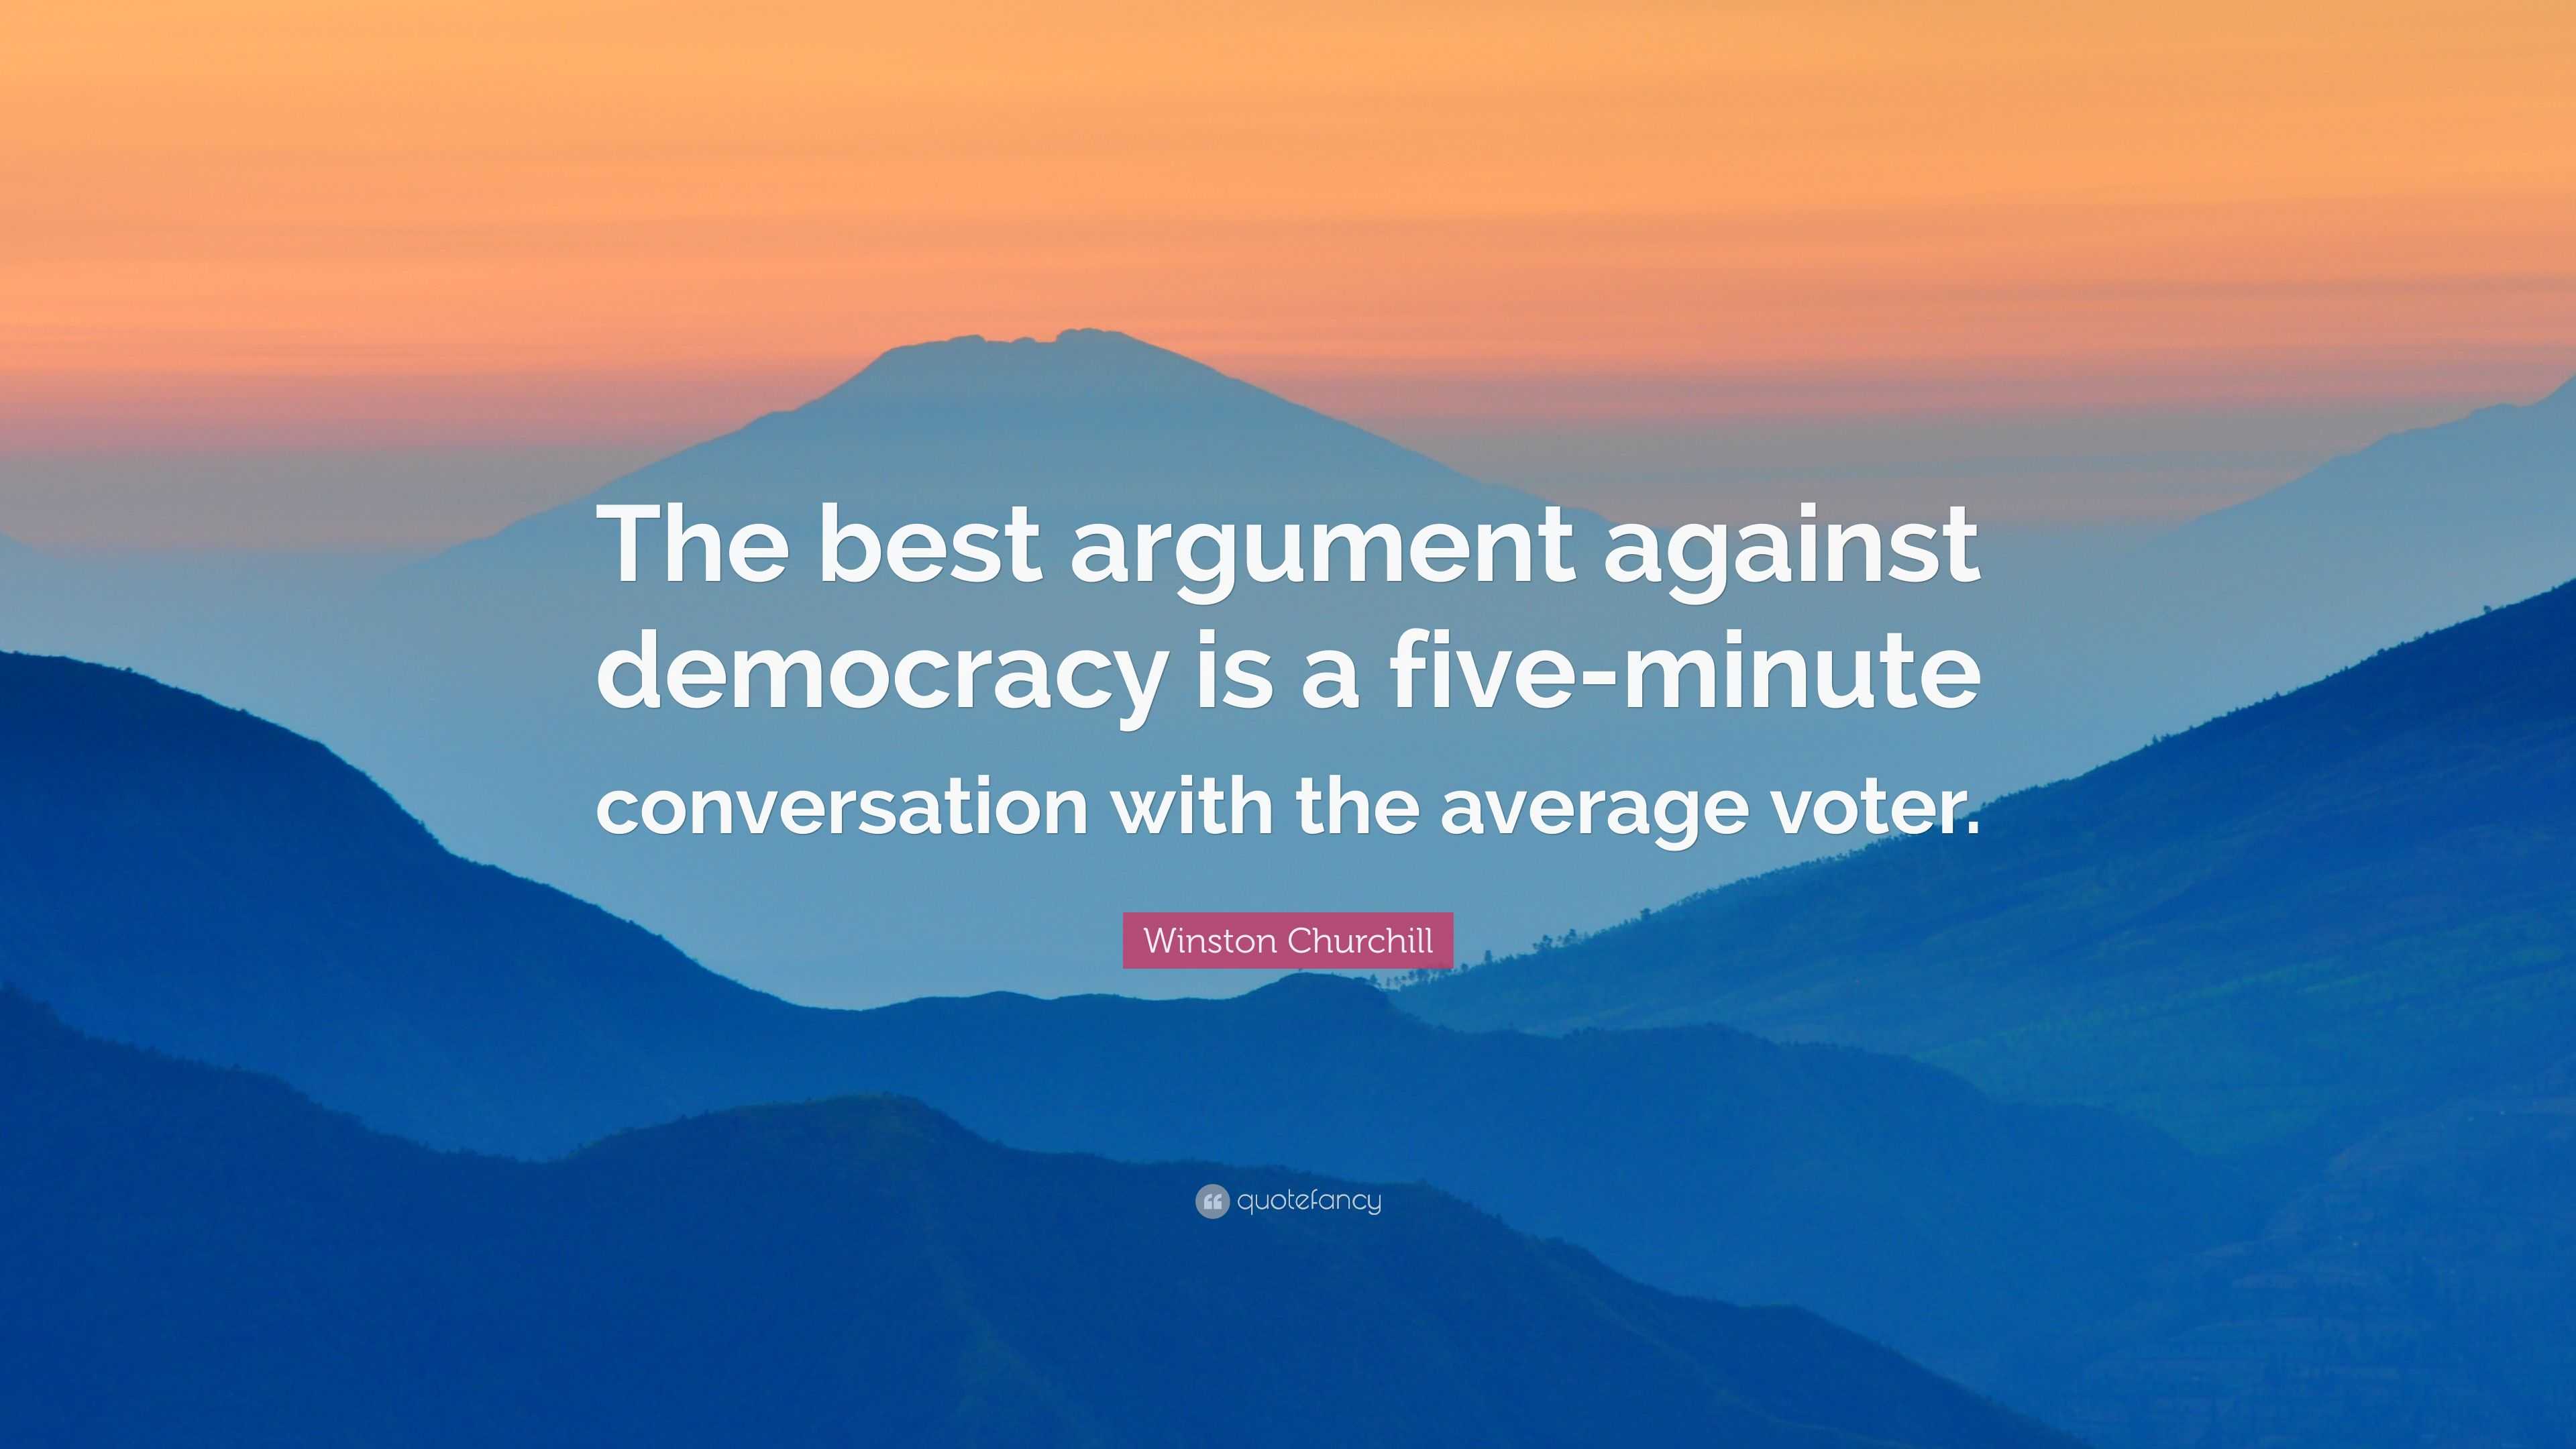 Winston Churchill Quote: “The best argument against democracy is a five